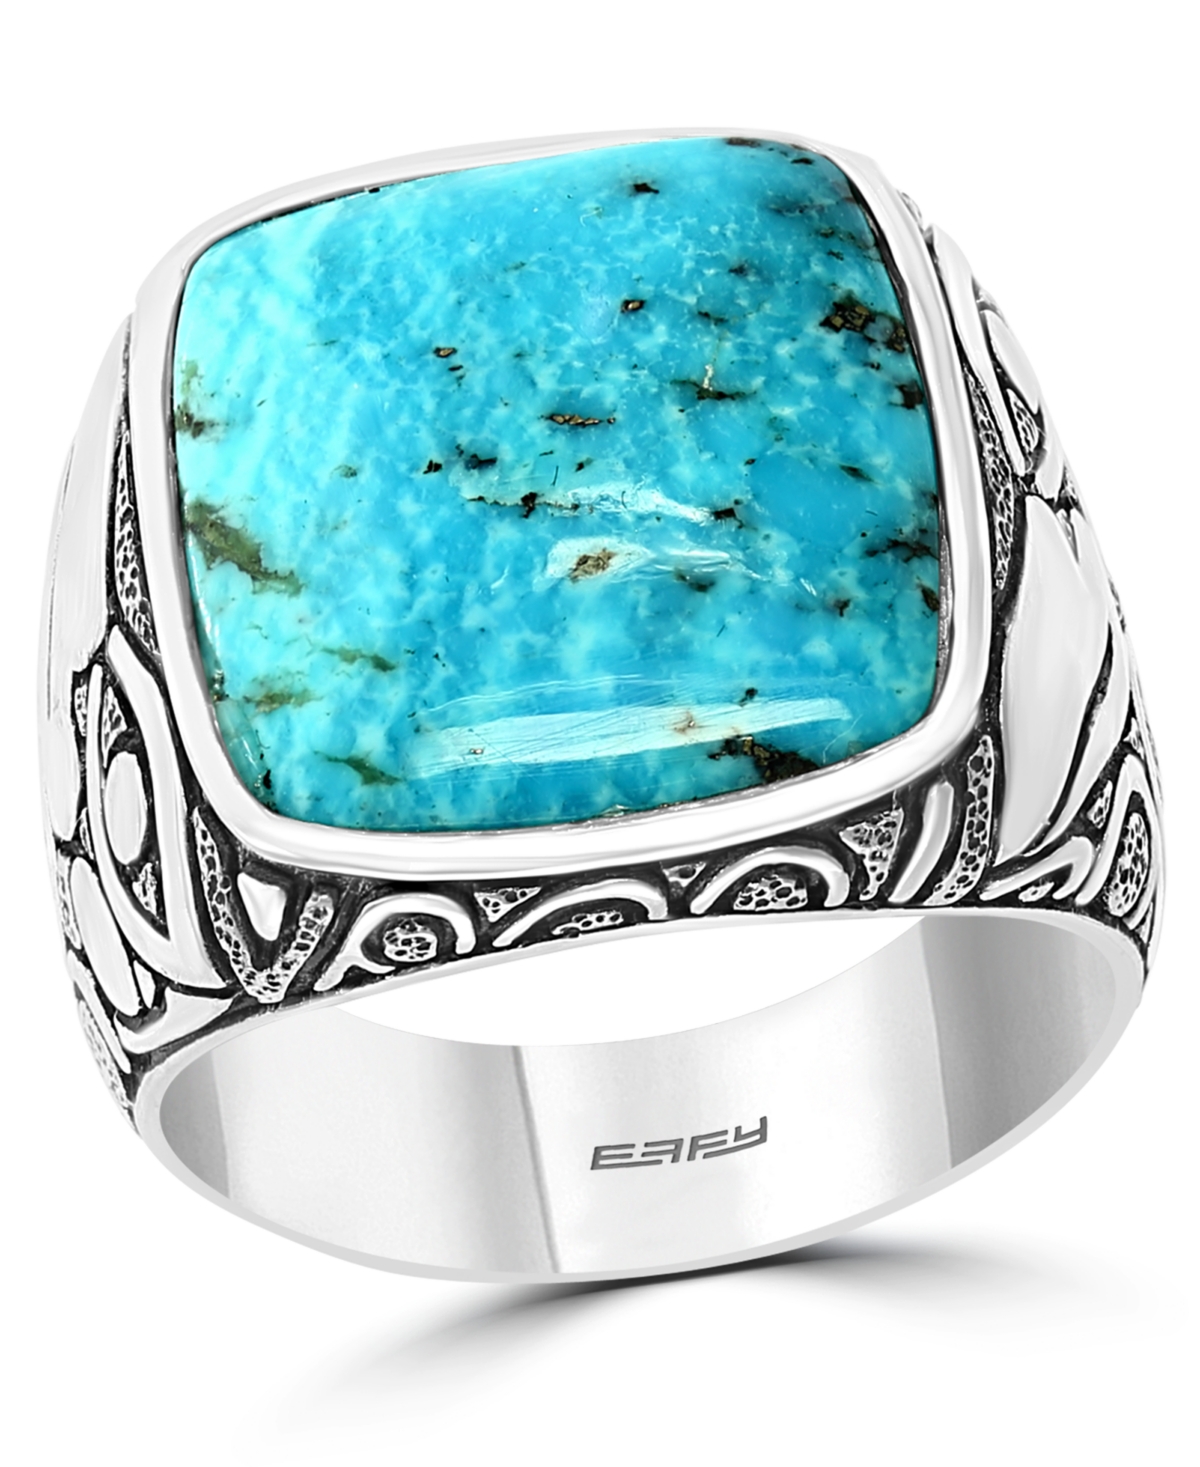 Effy Men's Turquoise Eagle Ring in Sterling Silver - Sterling Silver